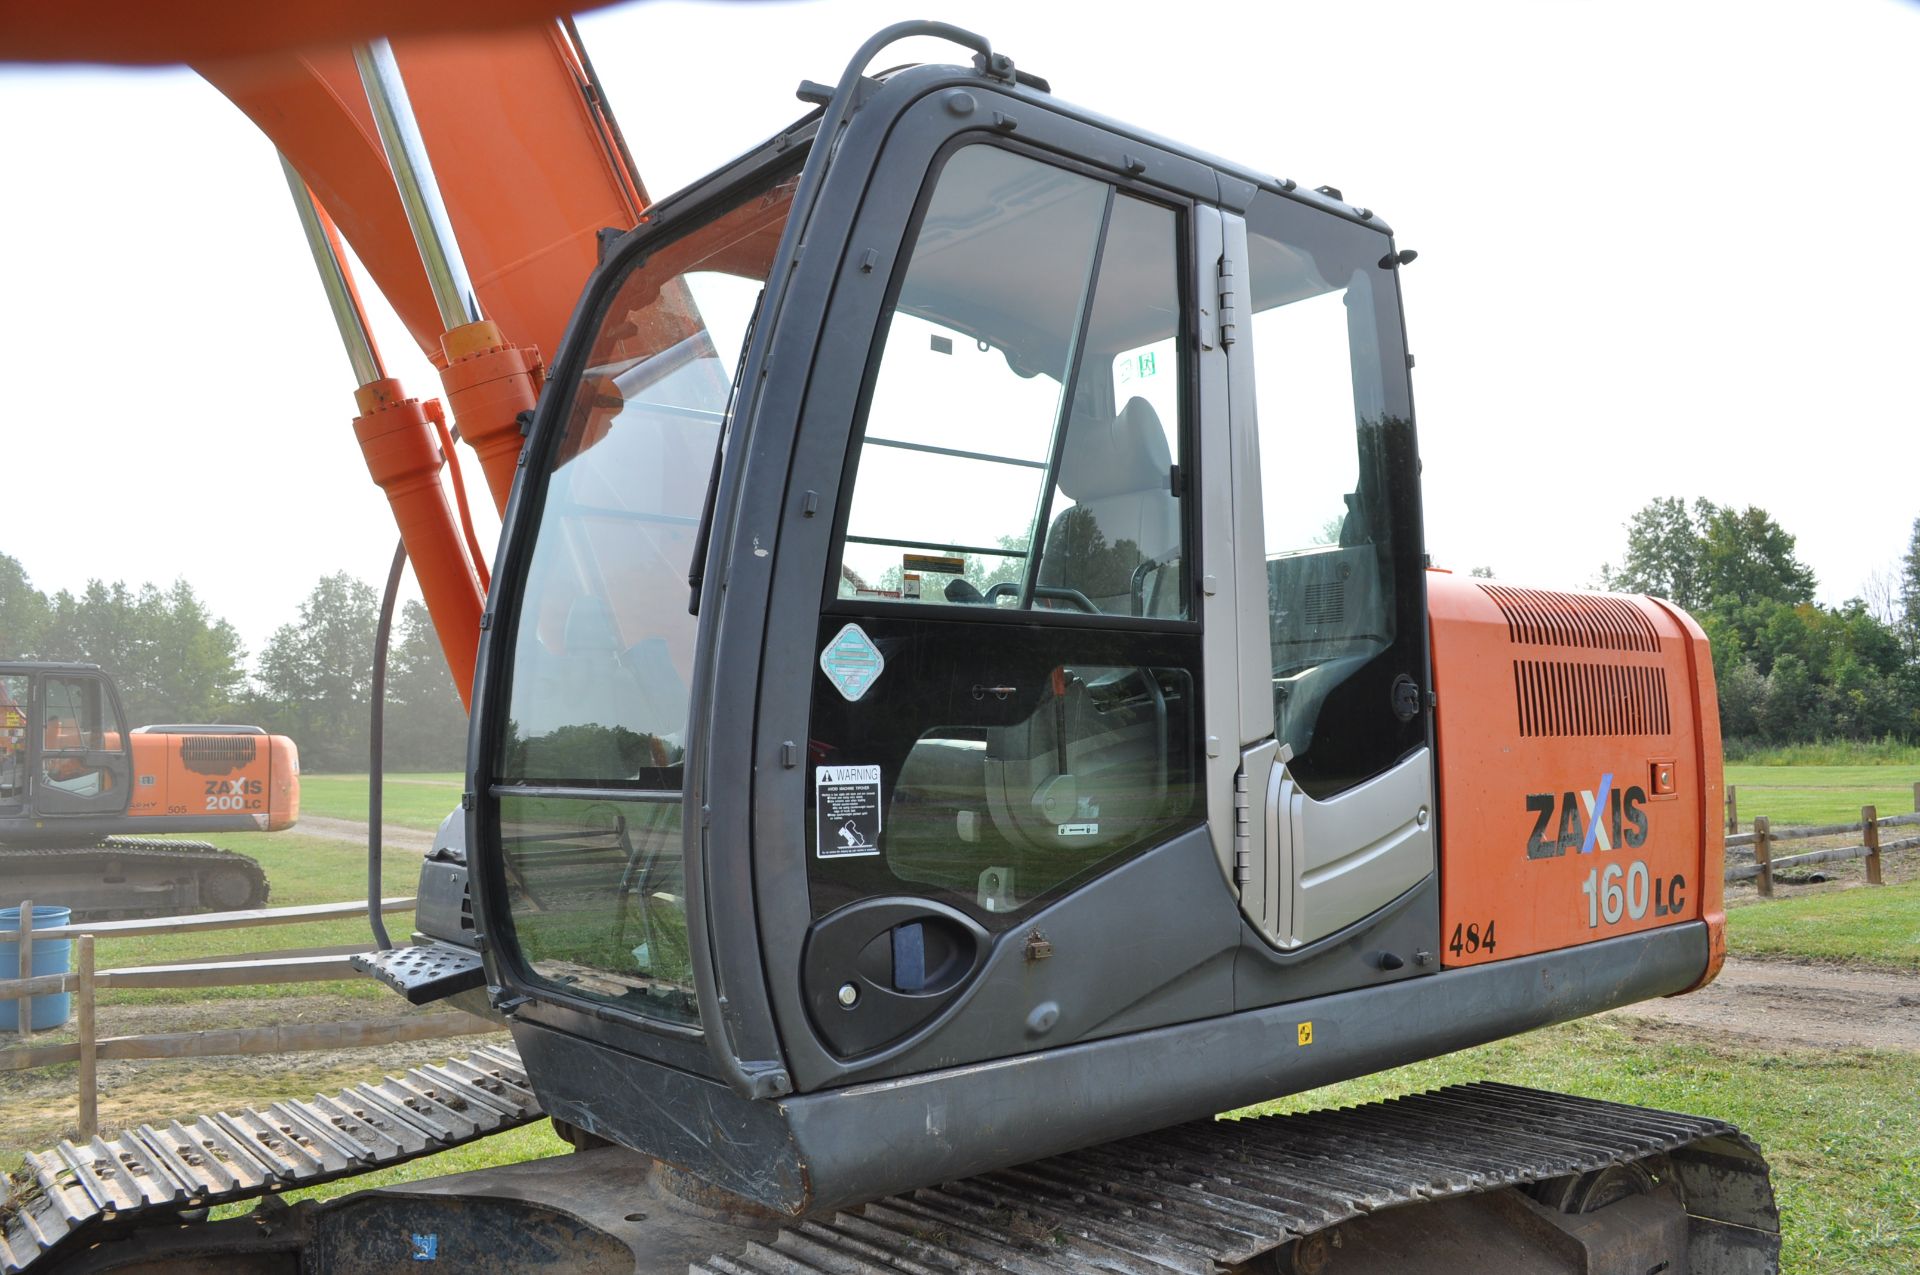 Hitachi ZX 160 LC-3 excavator, 28” steel pads, C/H/A, 5' smooth bucket, hyd coupler, aux boom hyd - Image 13 of 34